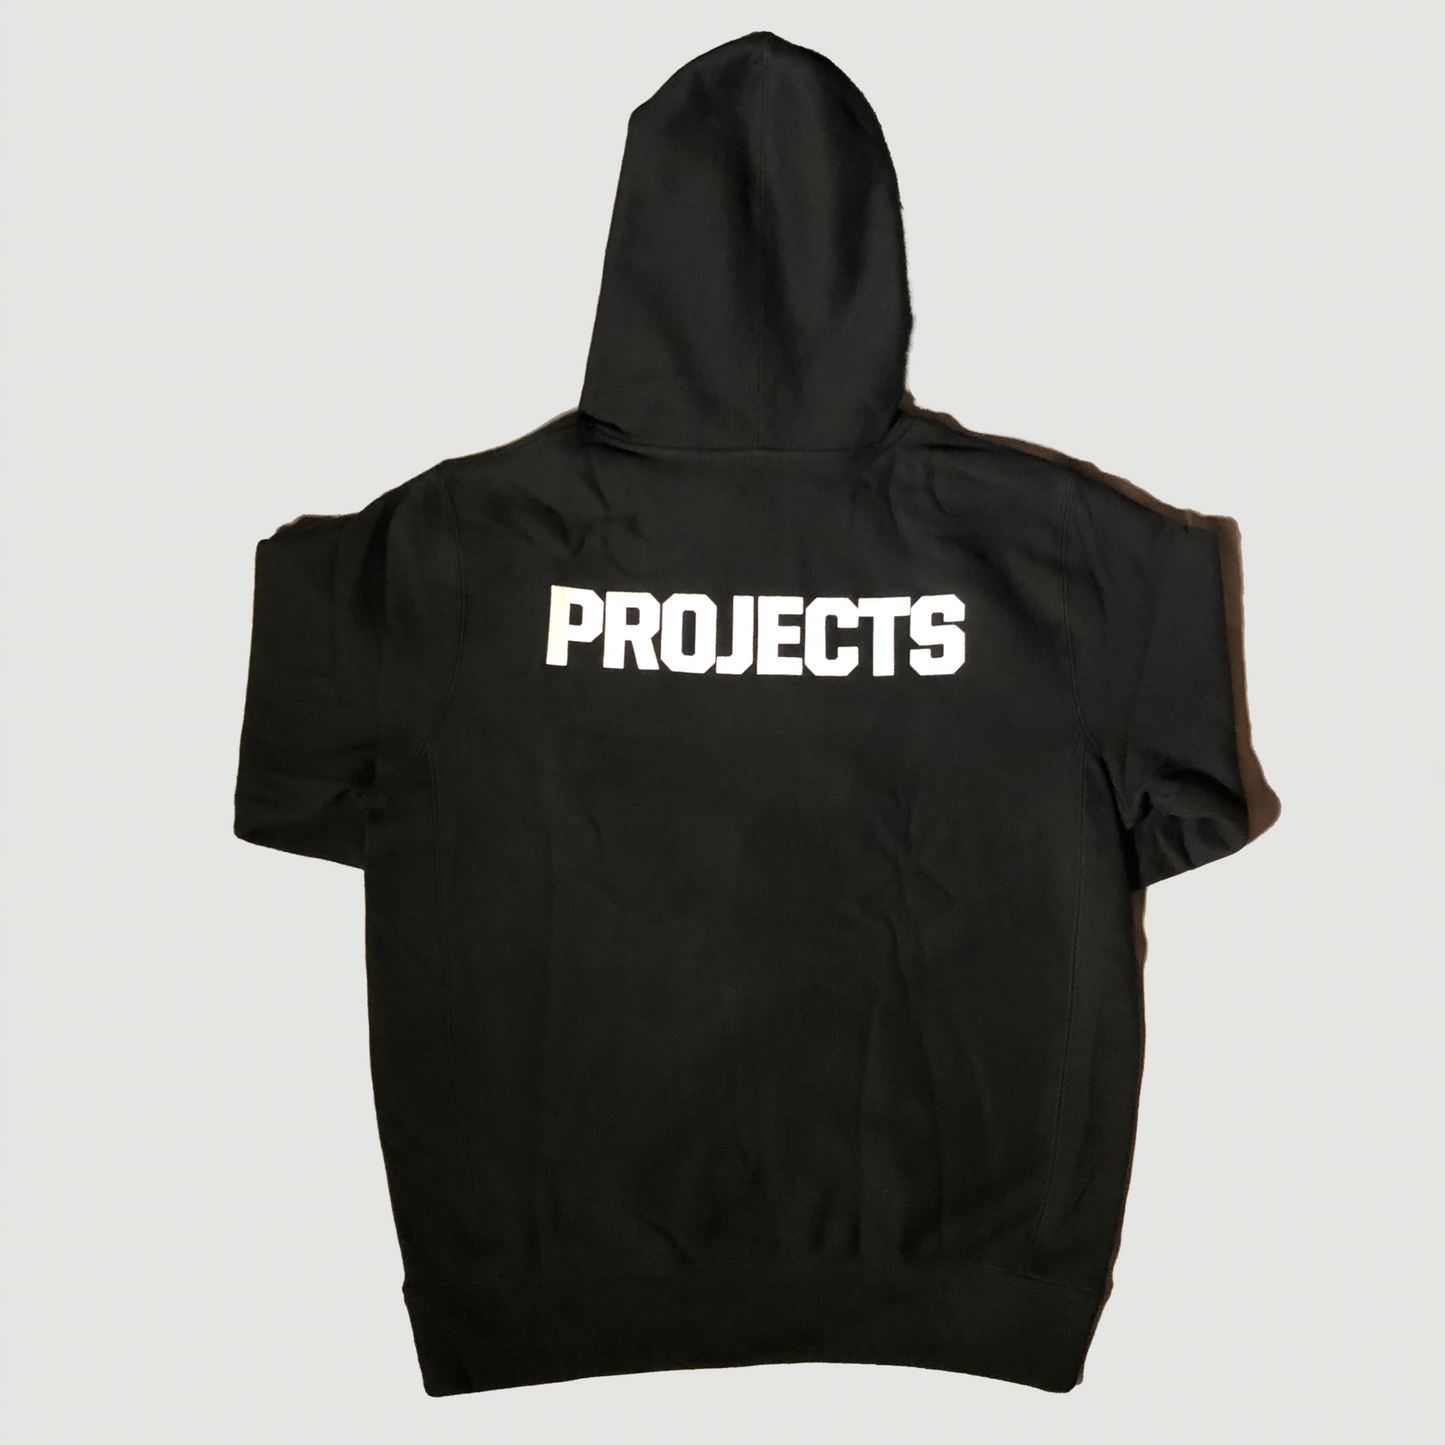 Projects Hoodie Black